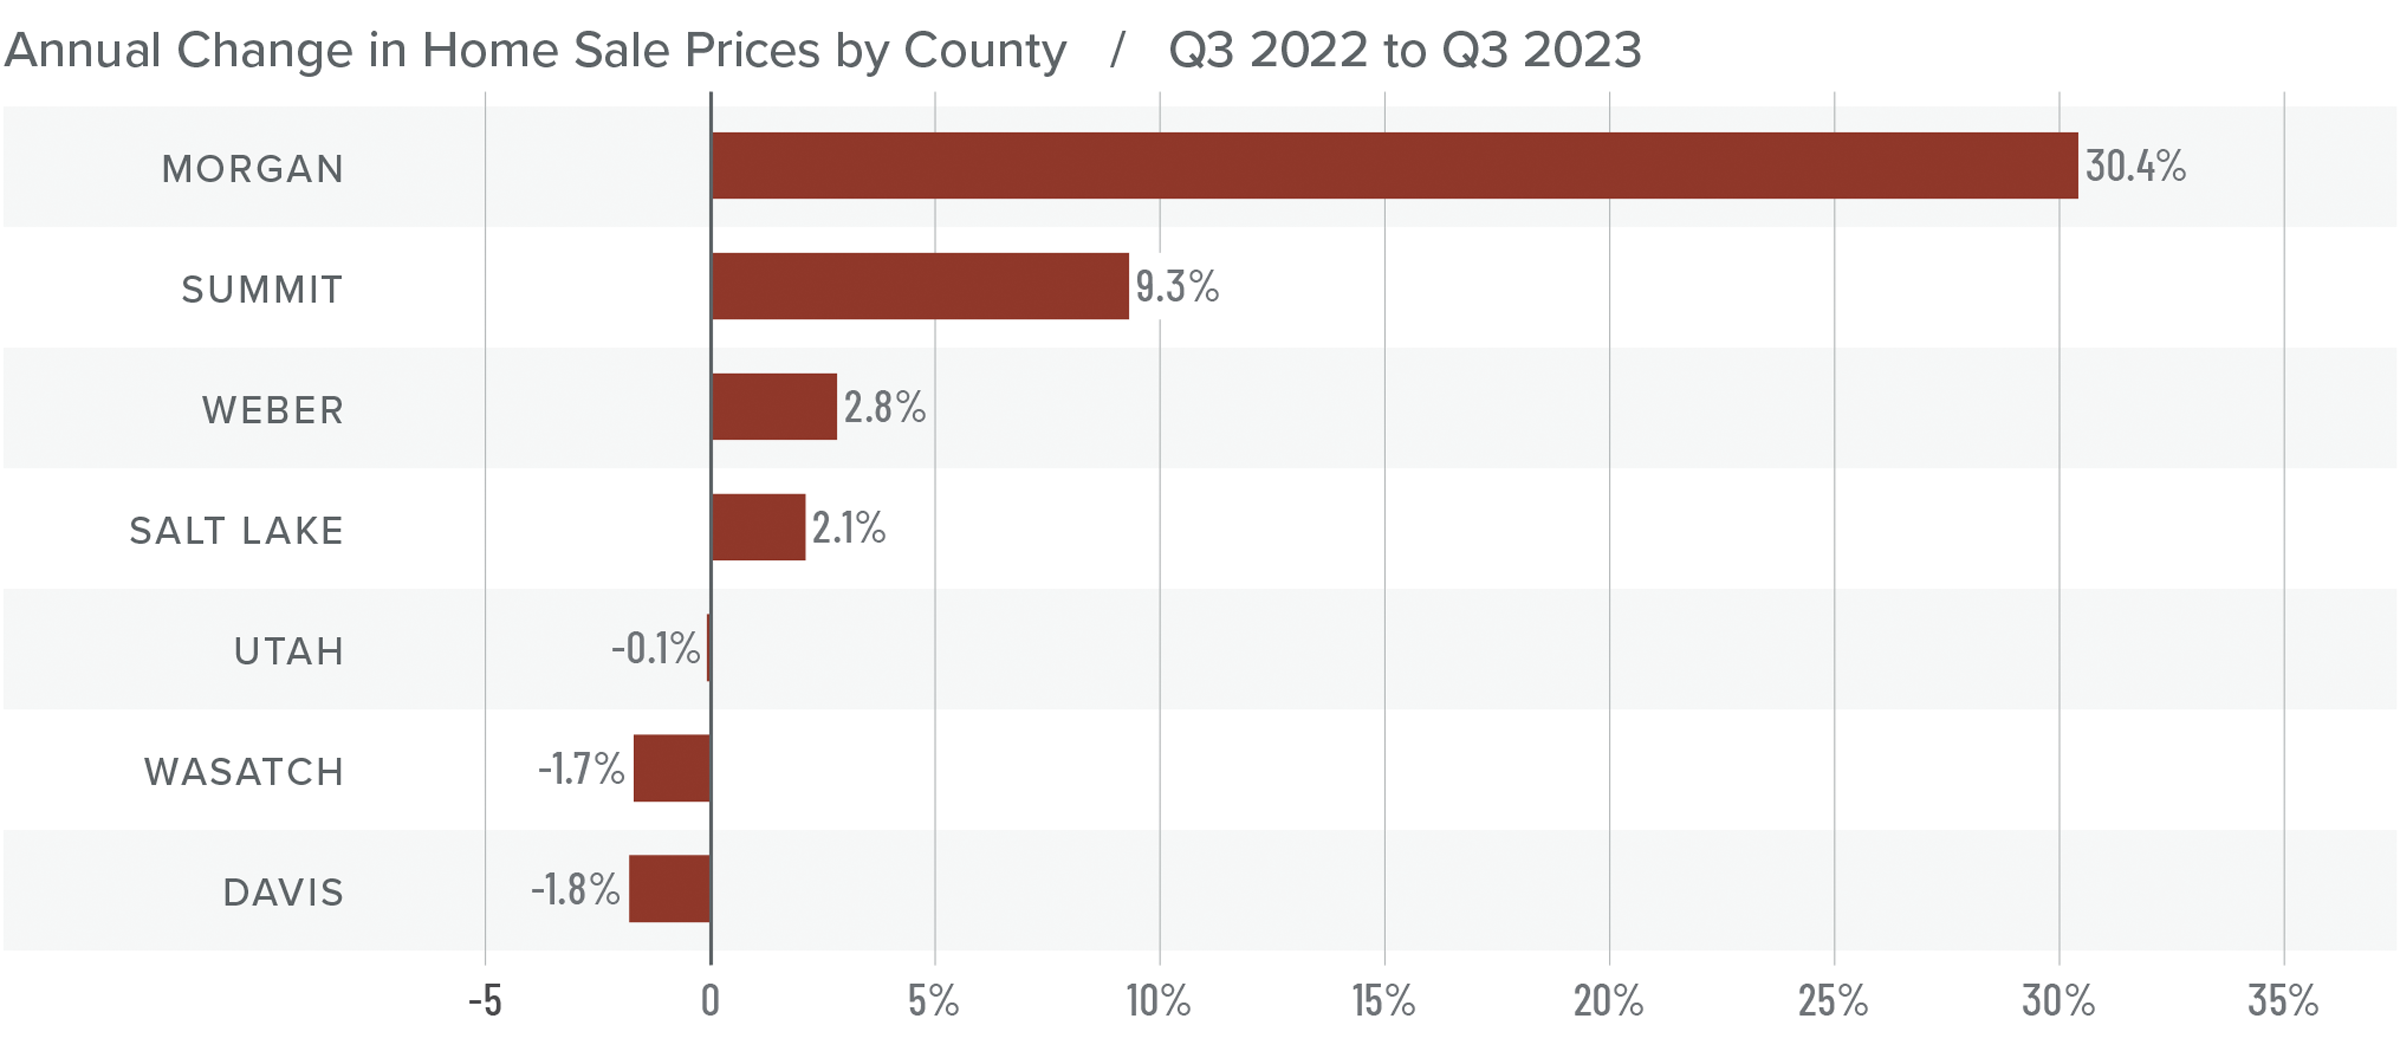 A bar graph showing the annual change in home sale prices by county in Utah from Q3 2022 to Q3 2023. Utah County had the least change at -0.1% while Davis had the greatest decrease of 1.8% and Morgan had the greatest increase of 30.4%.